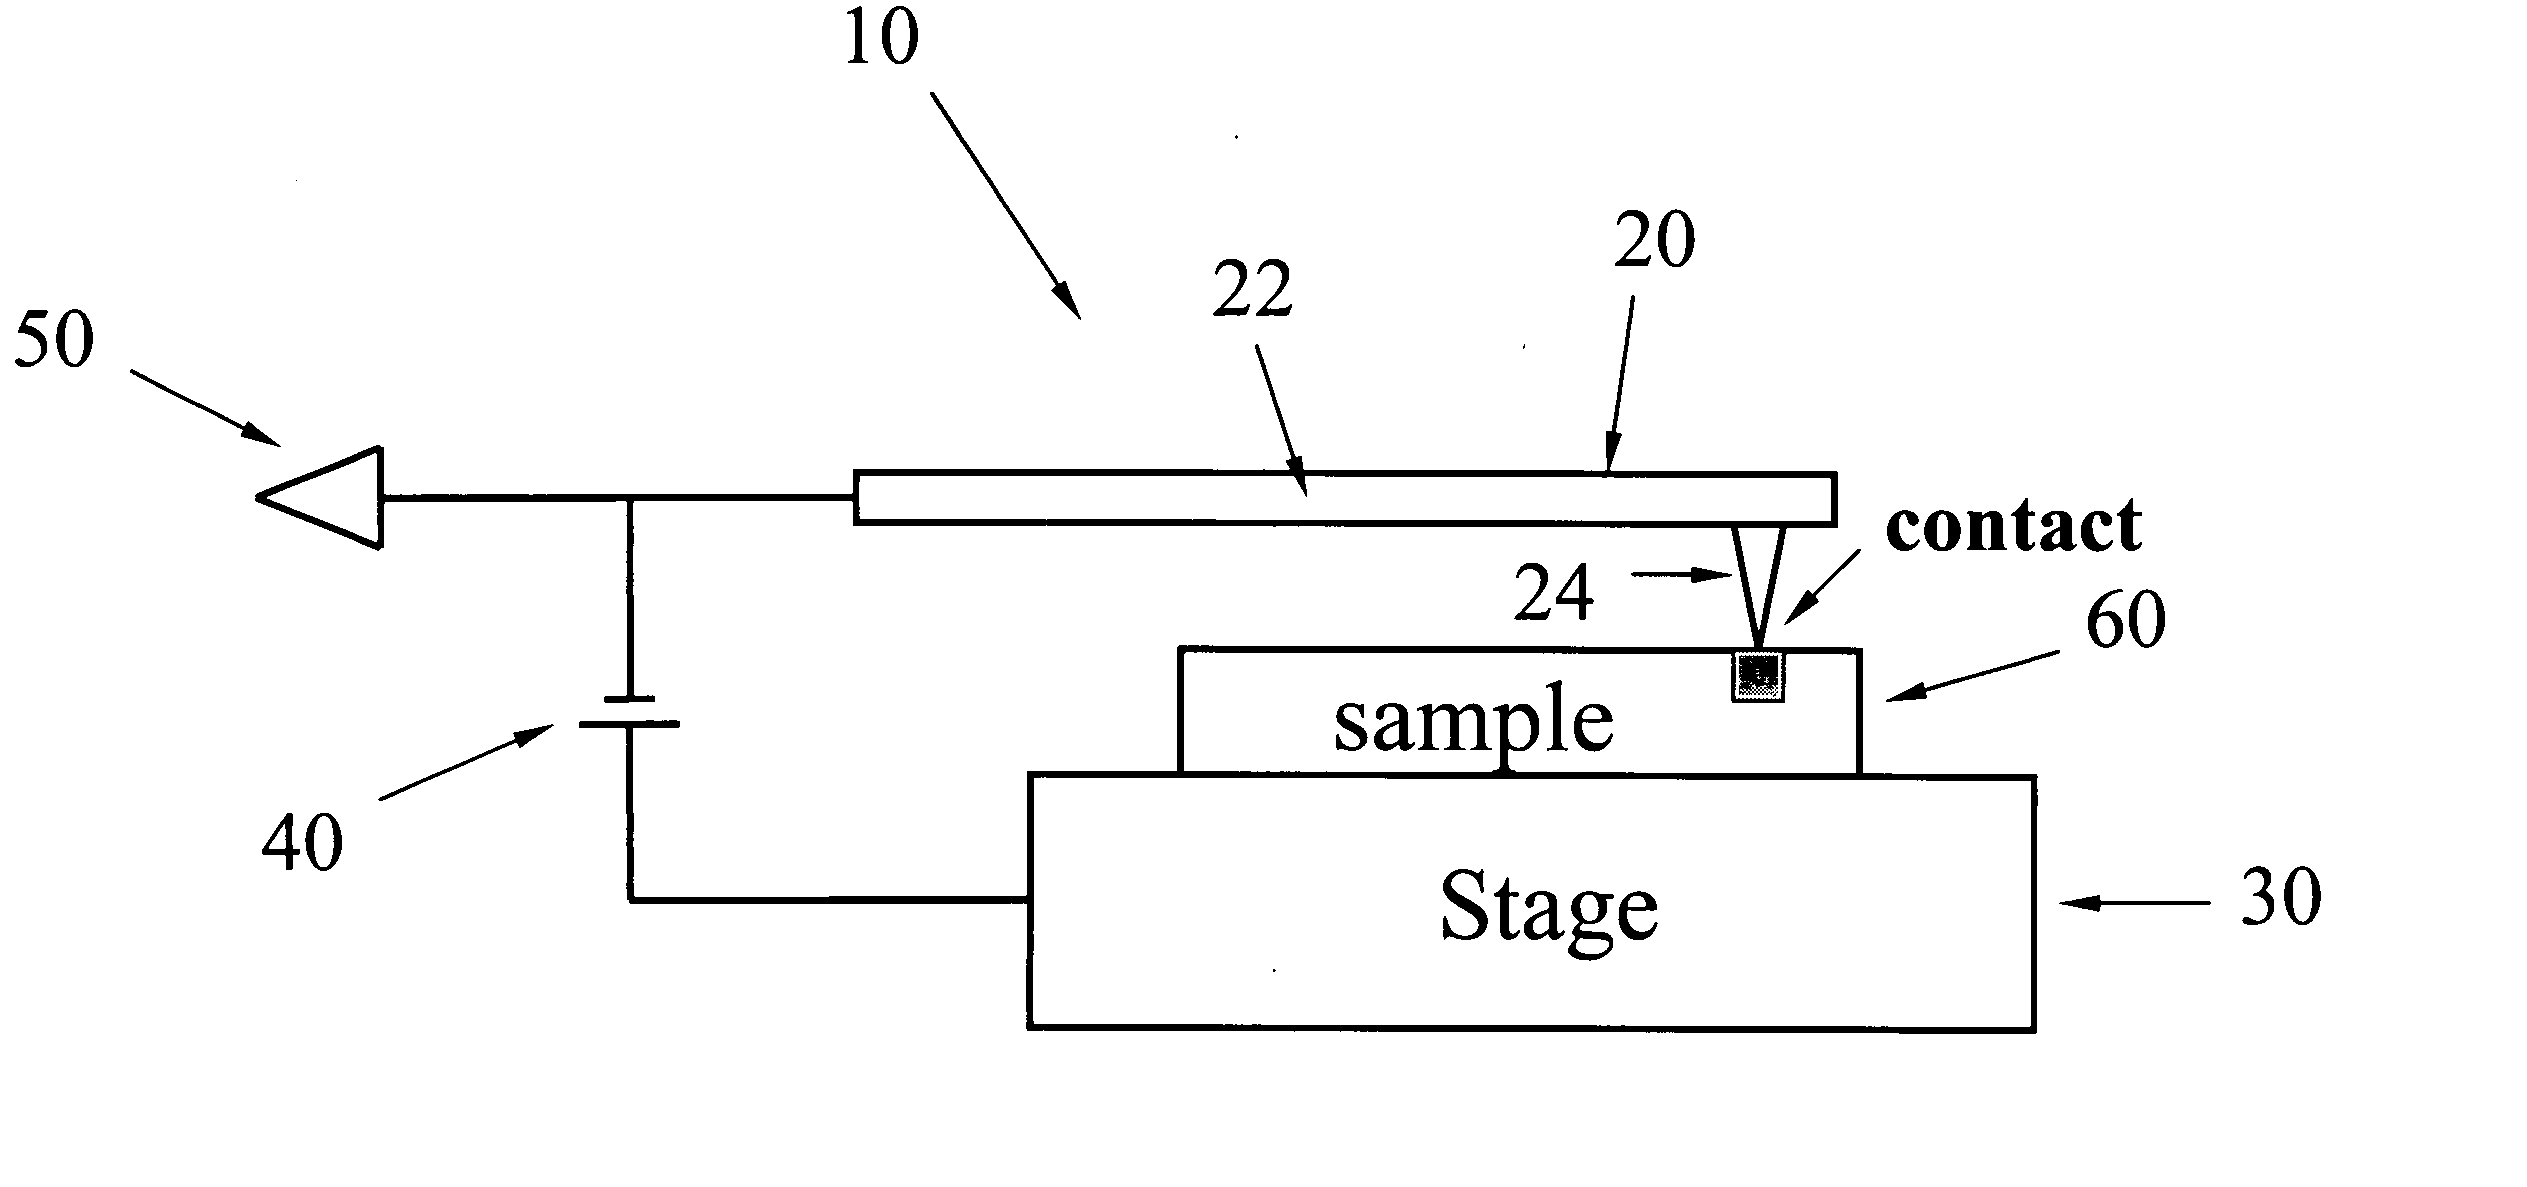 Method using conductive atomic force microscopy to measure contact leakage current